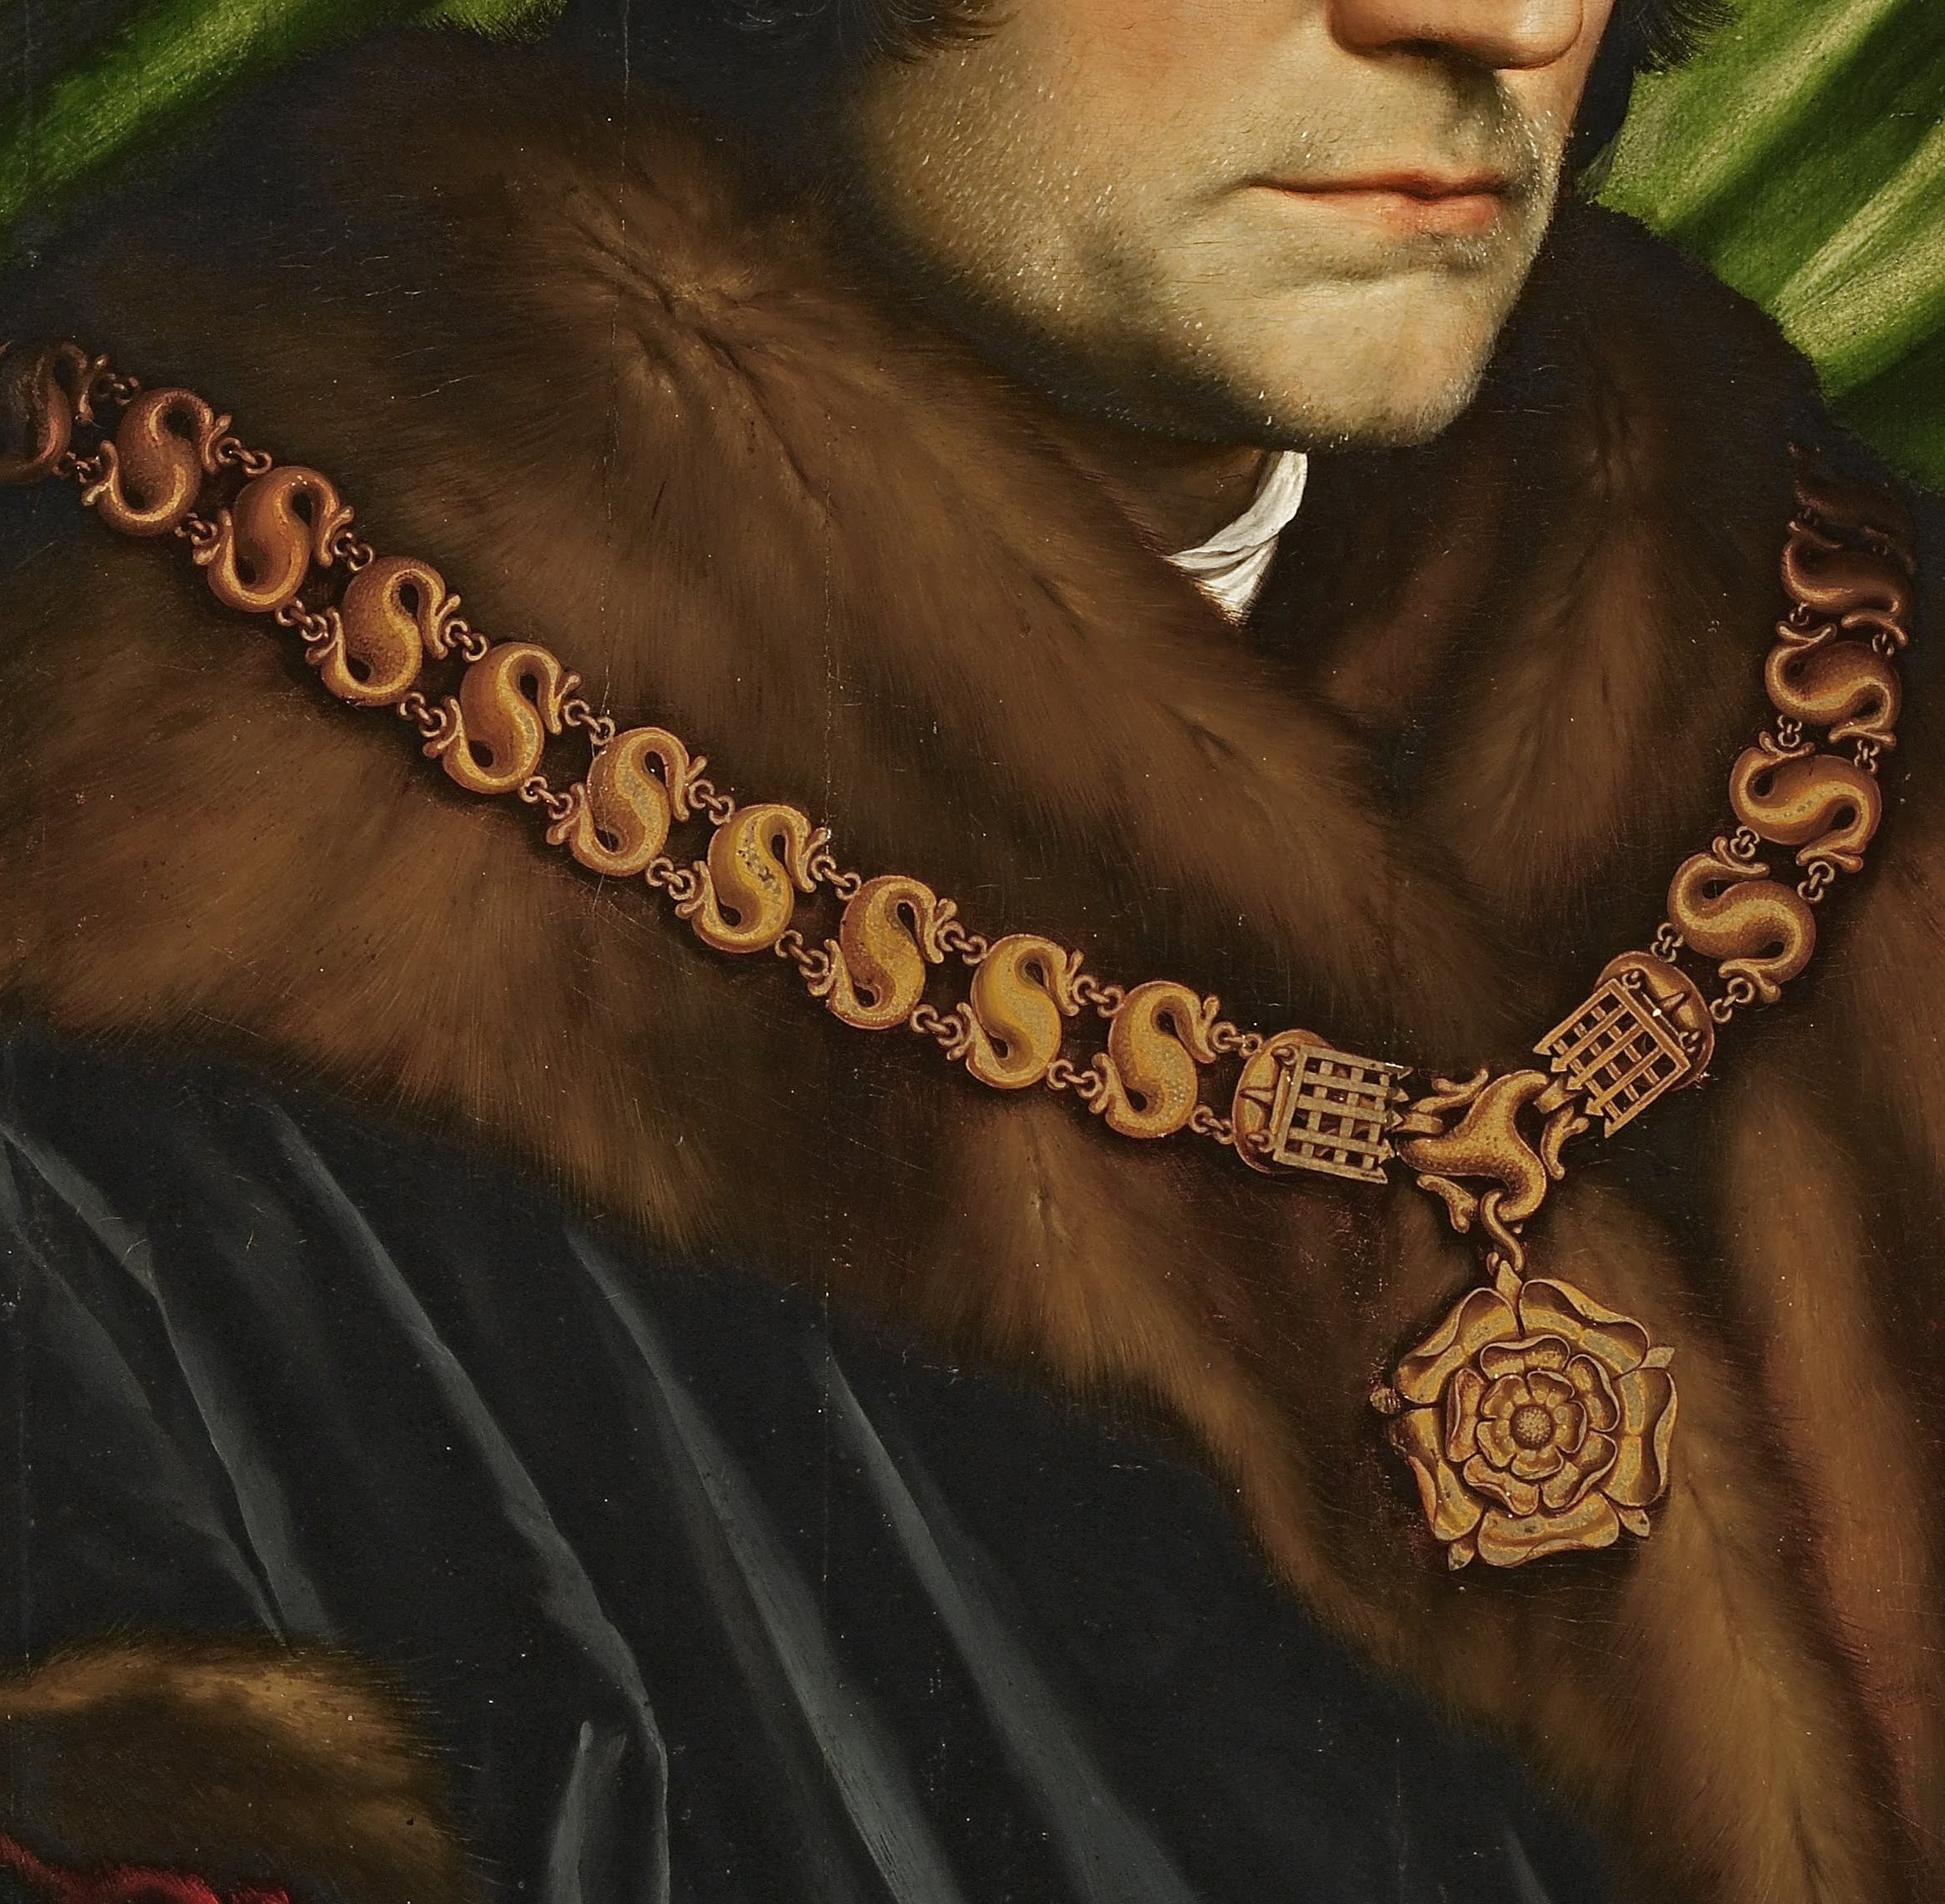 Sir Thomas More wearing the Collar of Esses, with a Tudor rose badge by Hans Holbein the Younger, 1527.